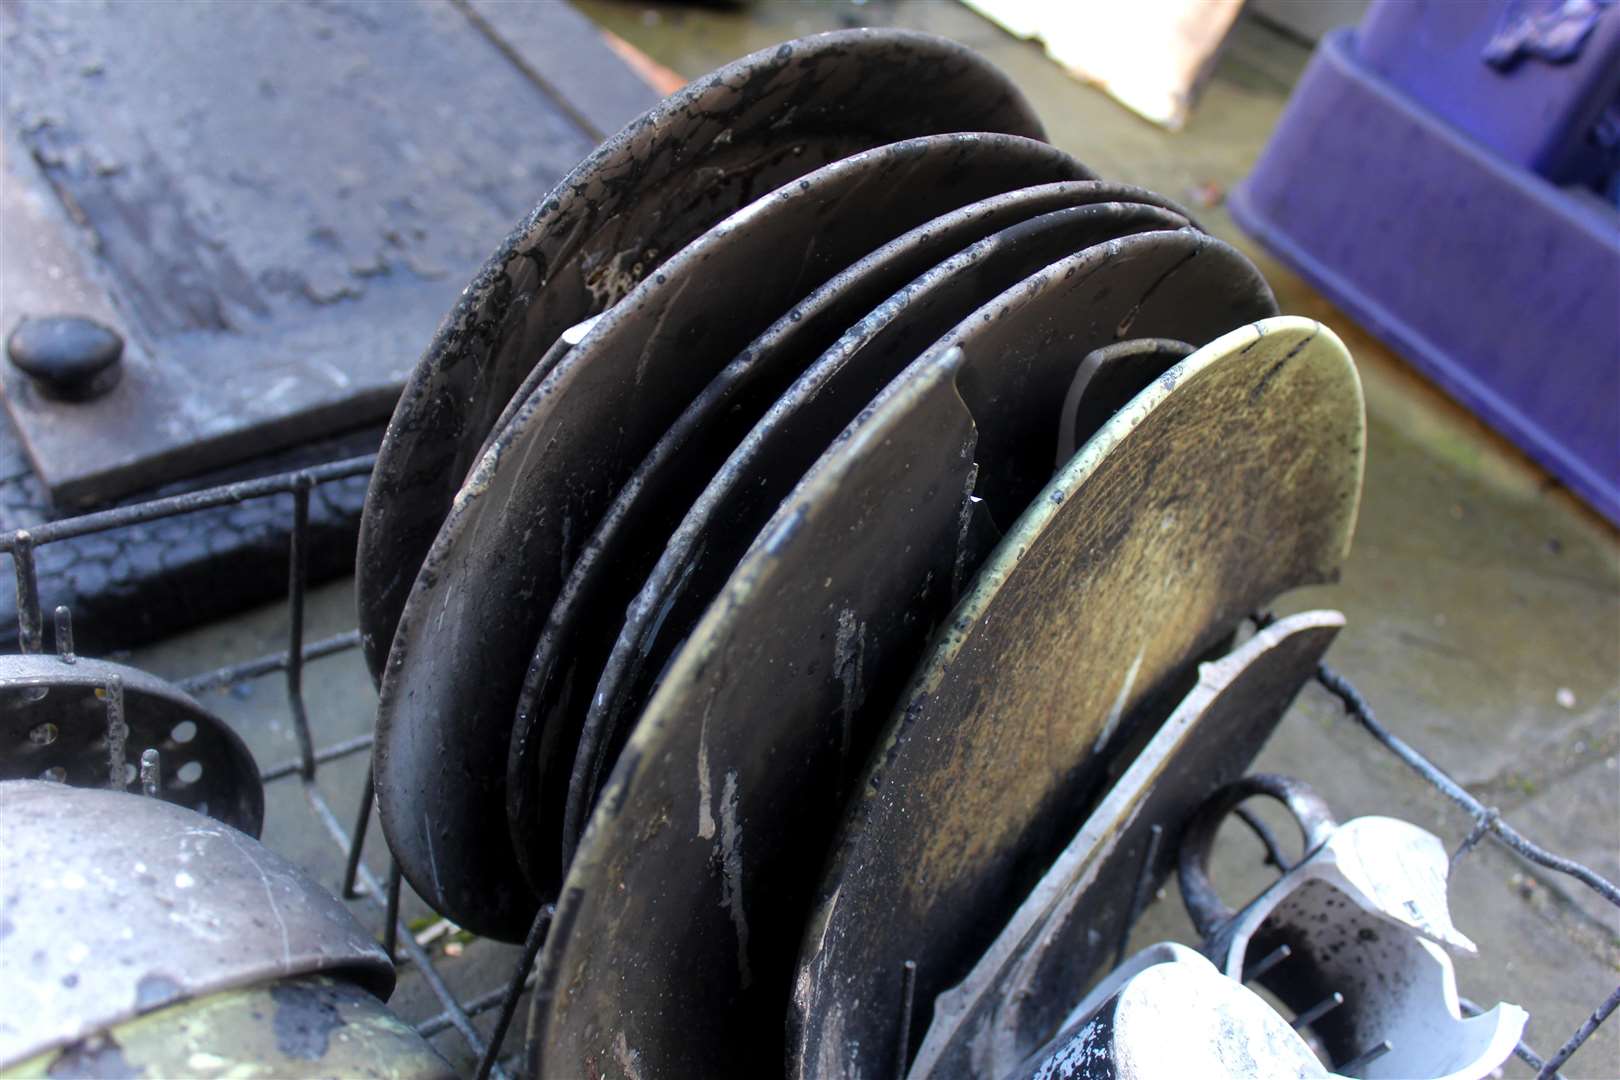 Damaged plates after a dishwasher fire. Stock photo.